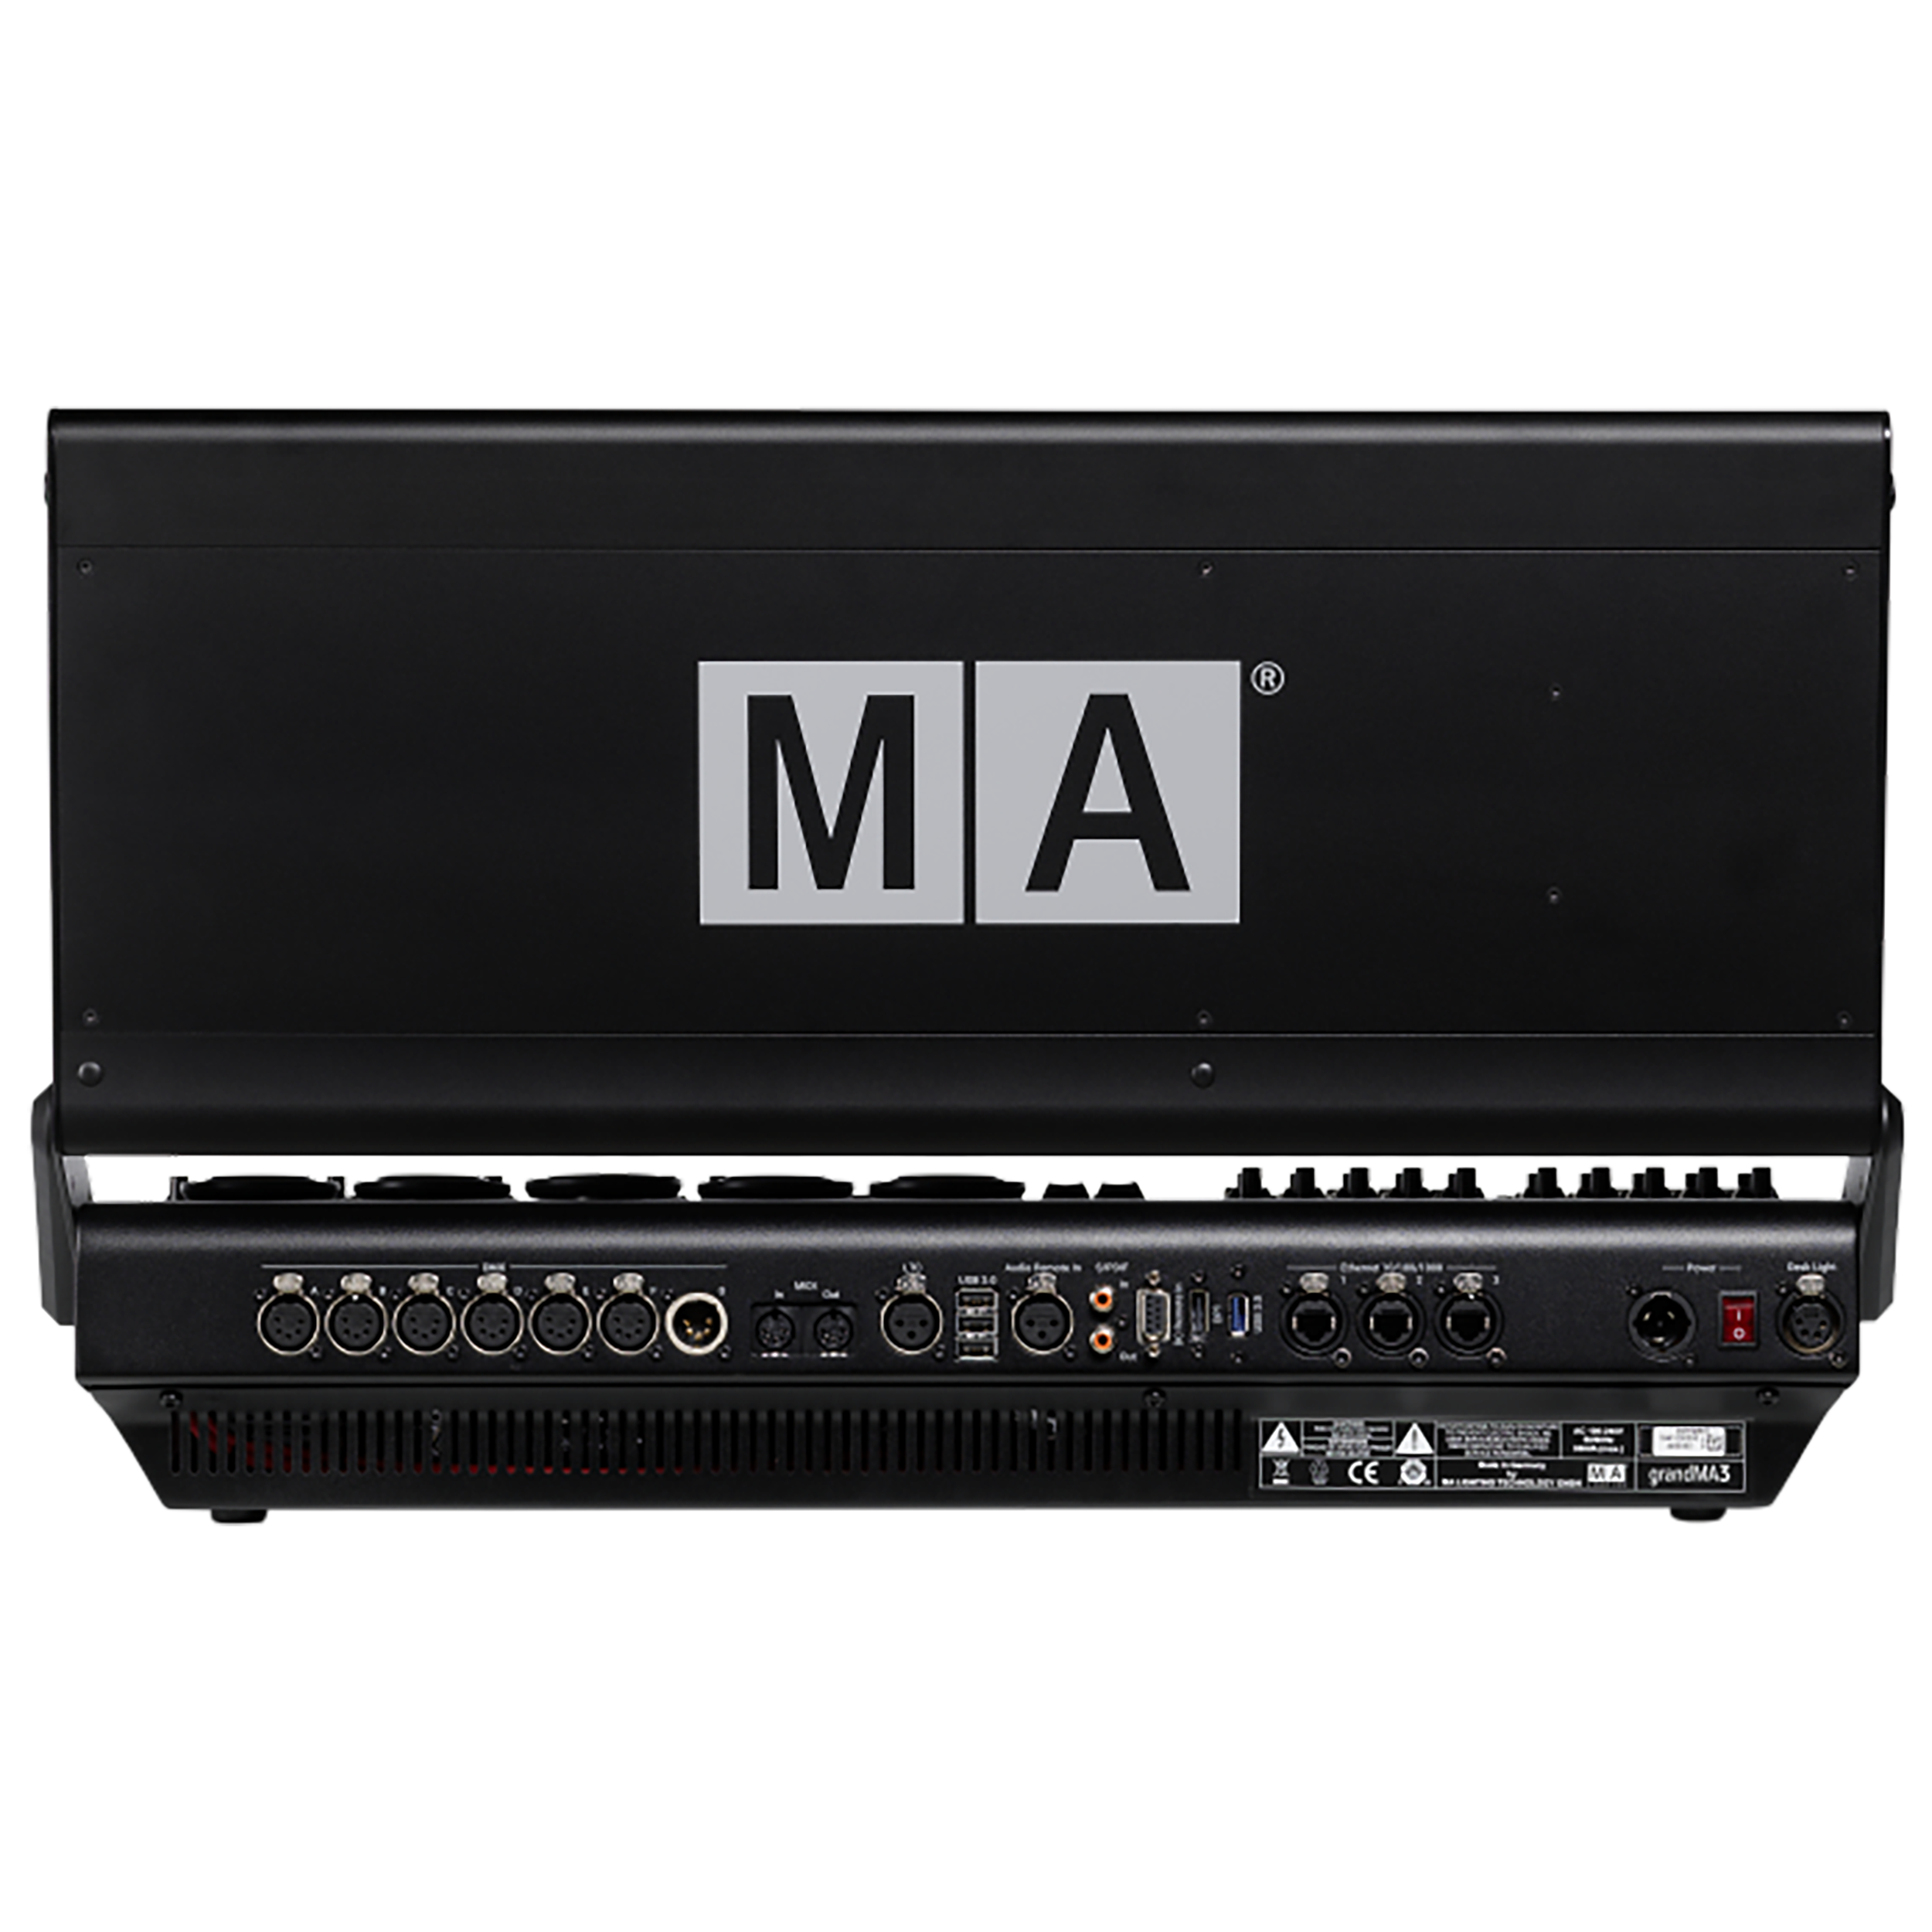 MA Lighting Grand MA3 Compact Lighting Console tourPack with BYFP ipCase